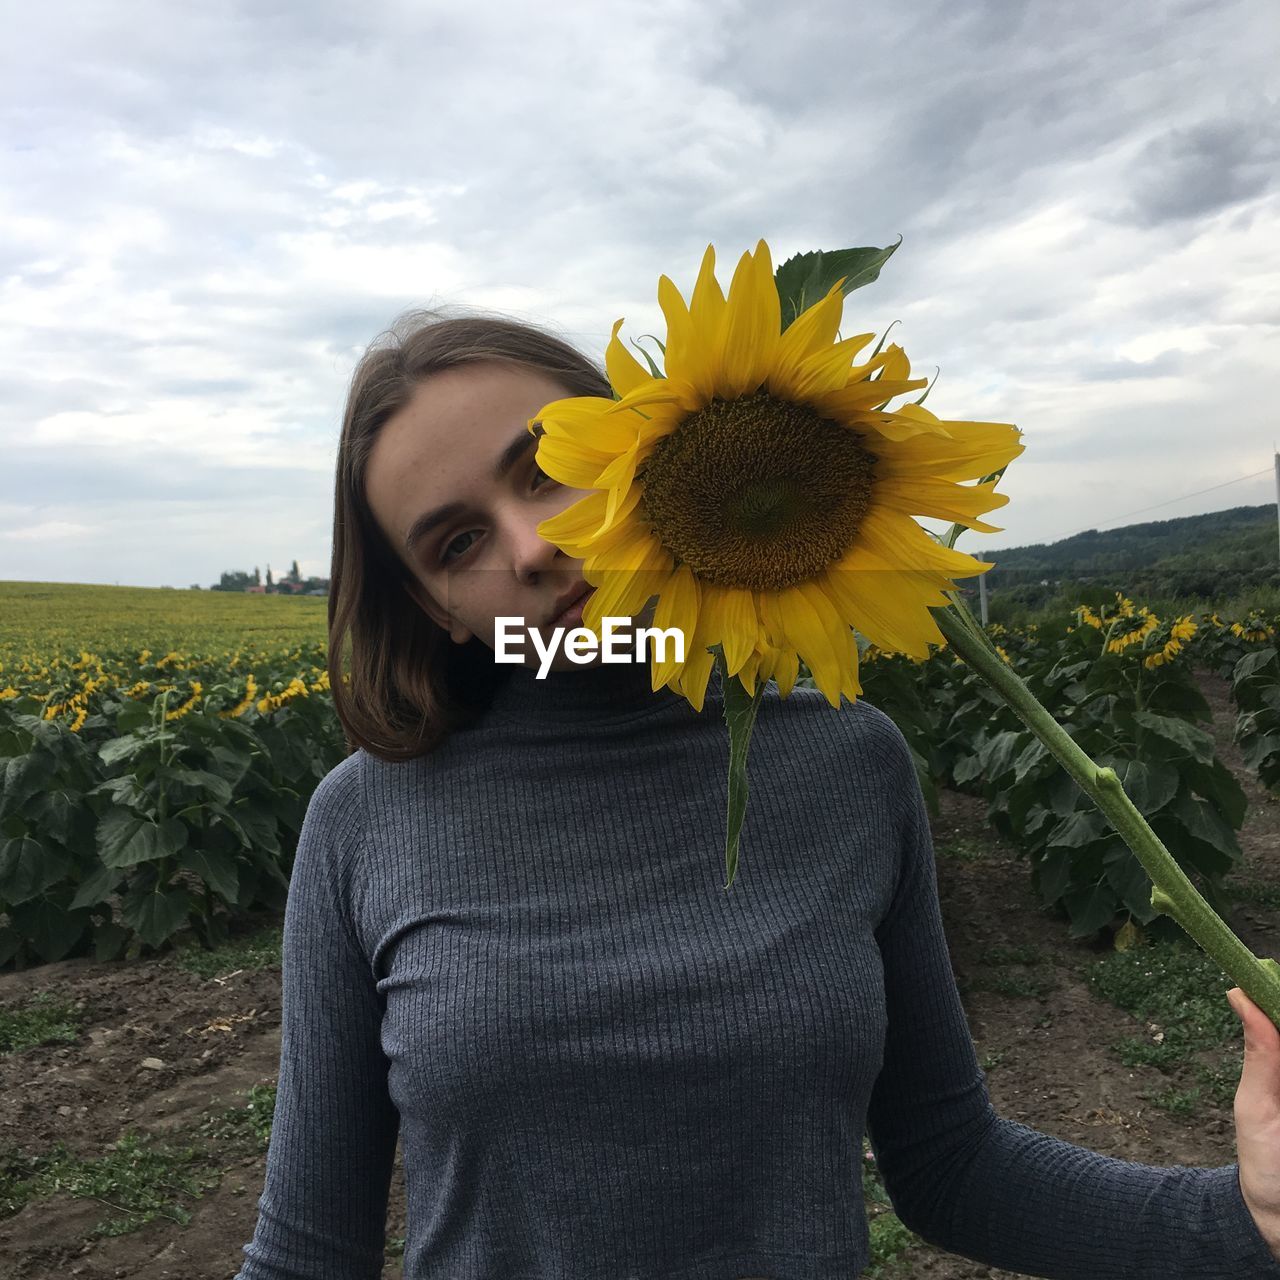 Midsection of woman holding sunflower against sky